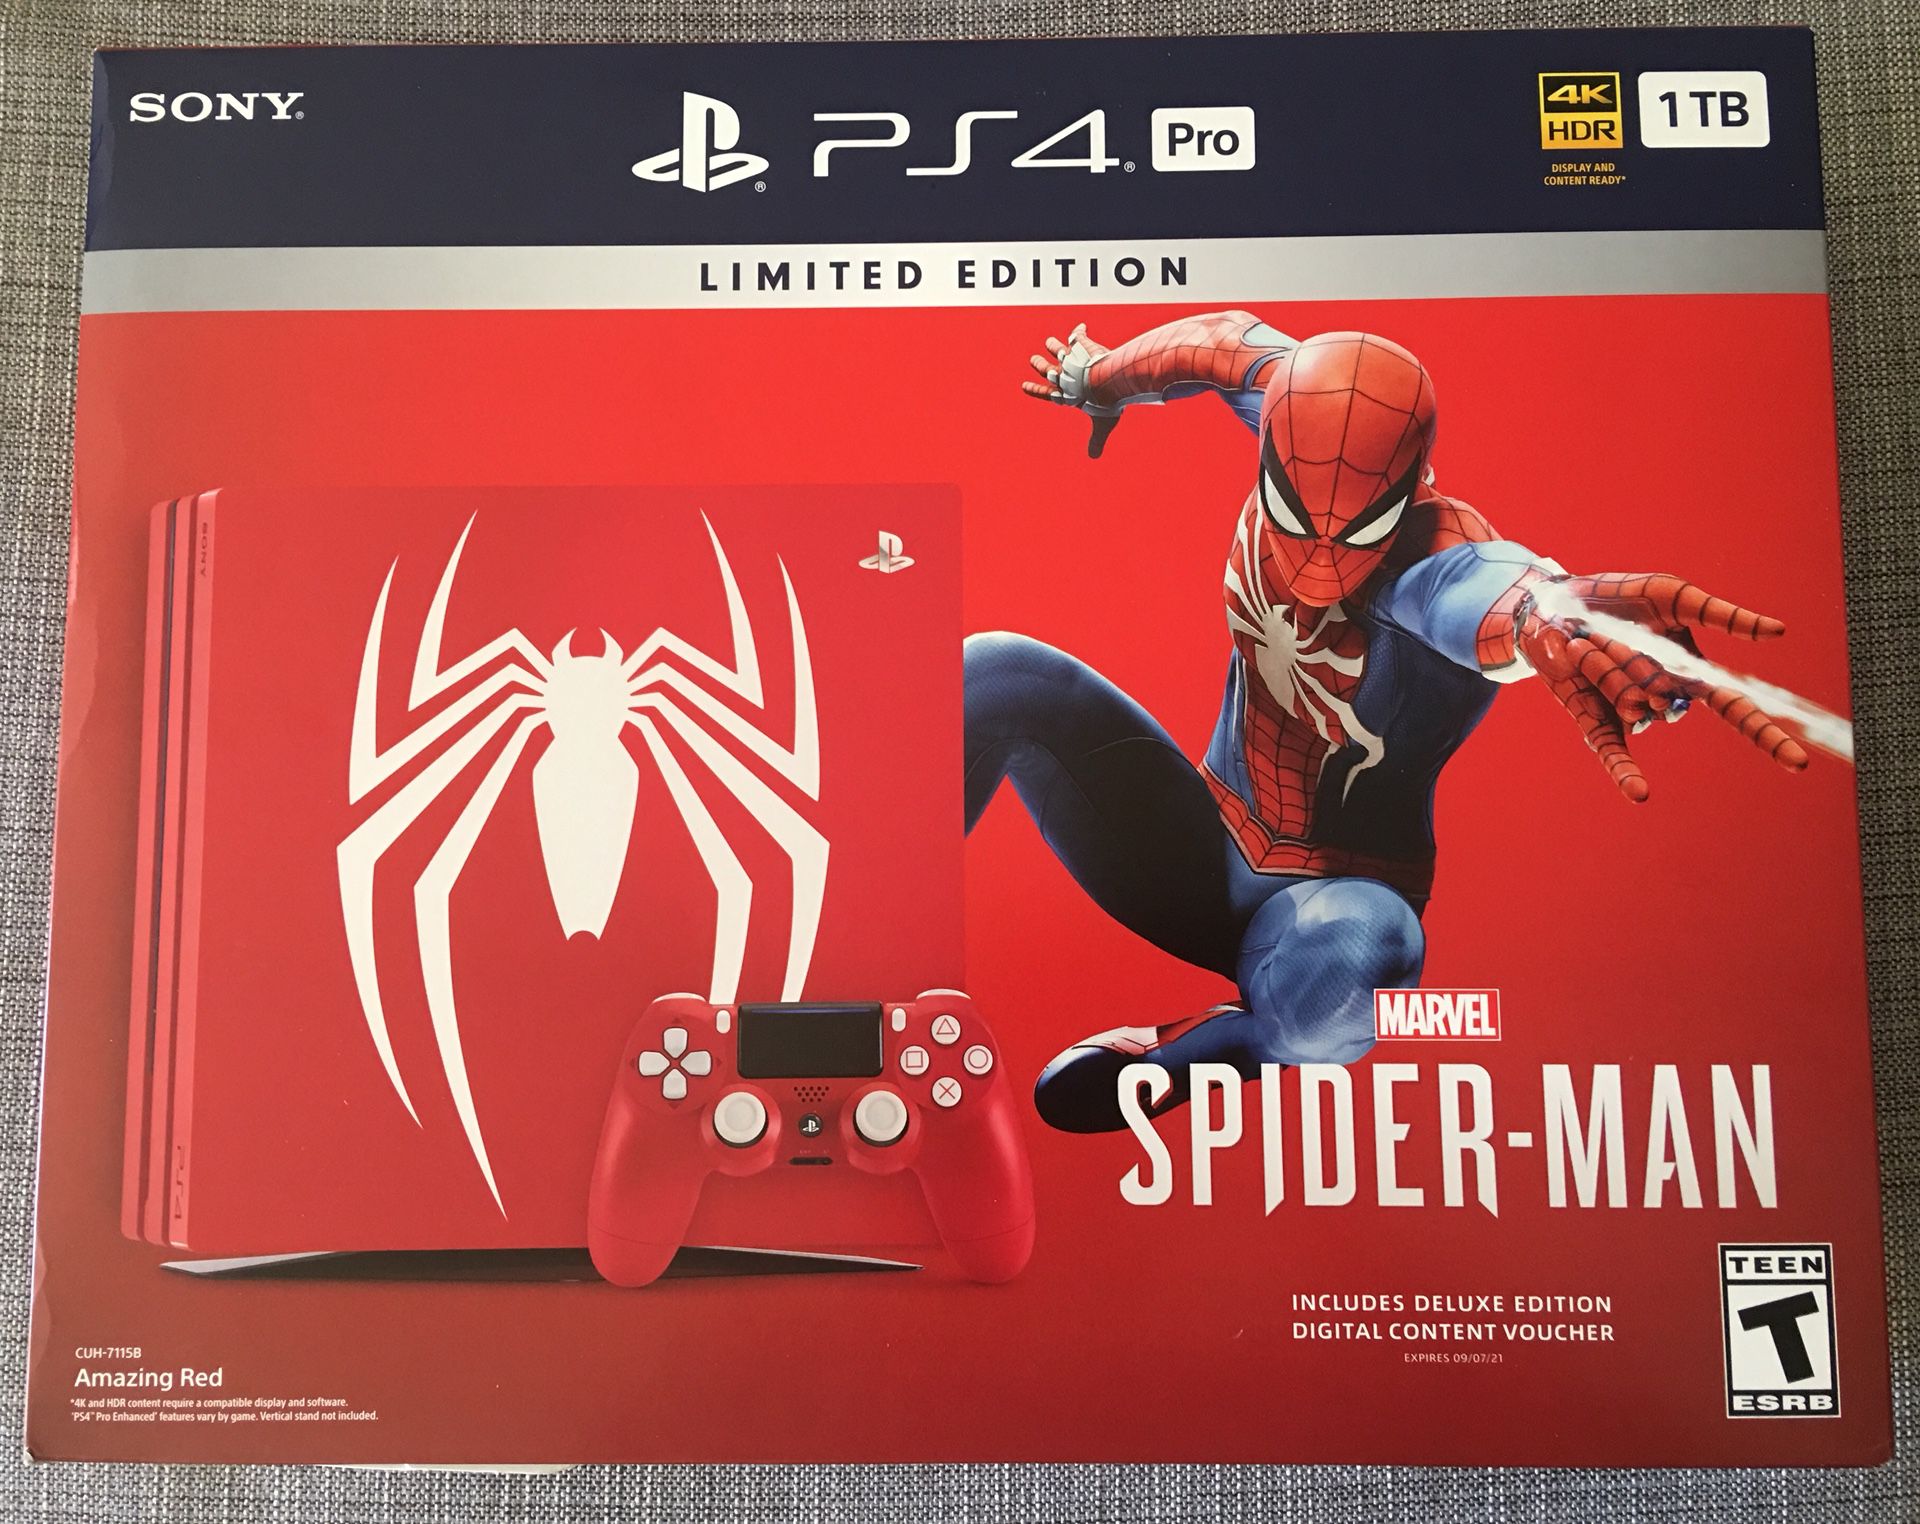 Spider-Man Playstation 4 Pro Limited Edition Console ONLY for Sale in Albany, CA OfferUp